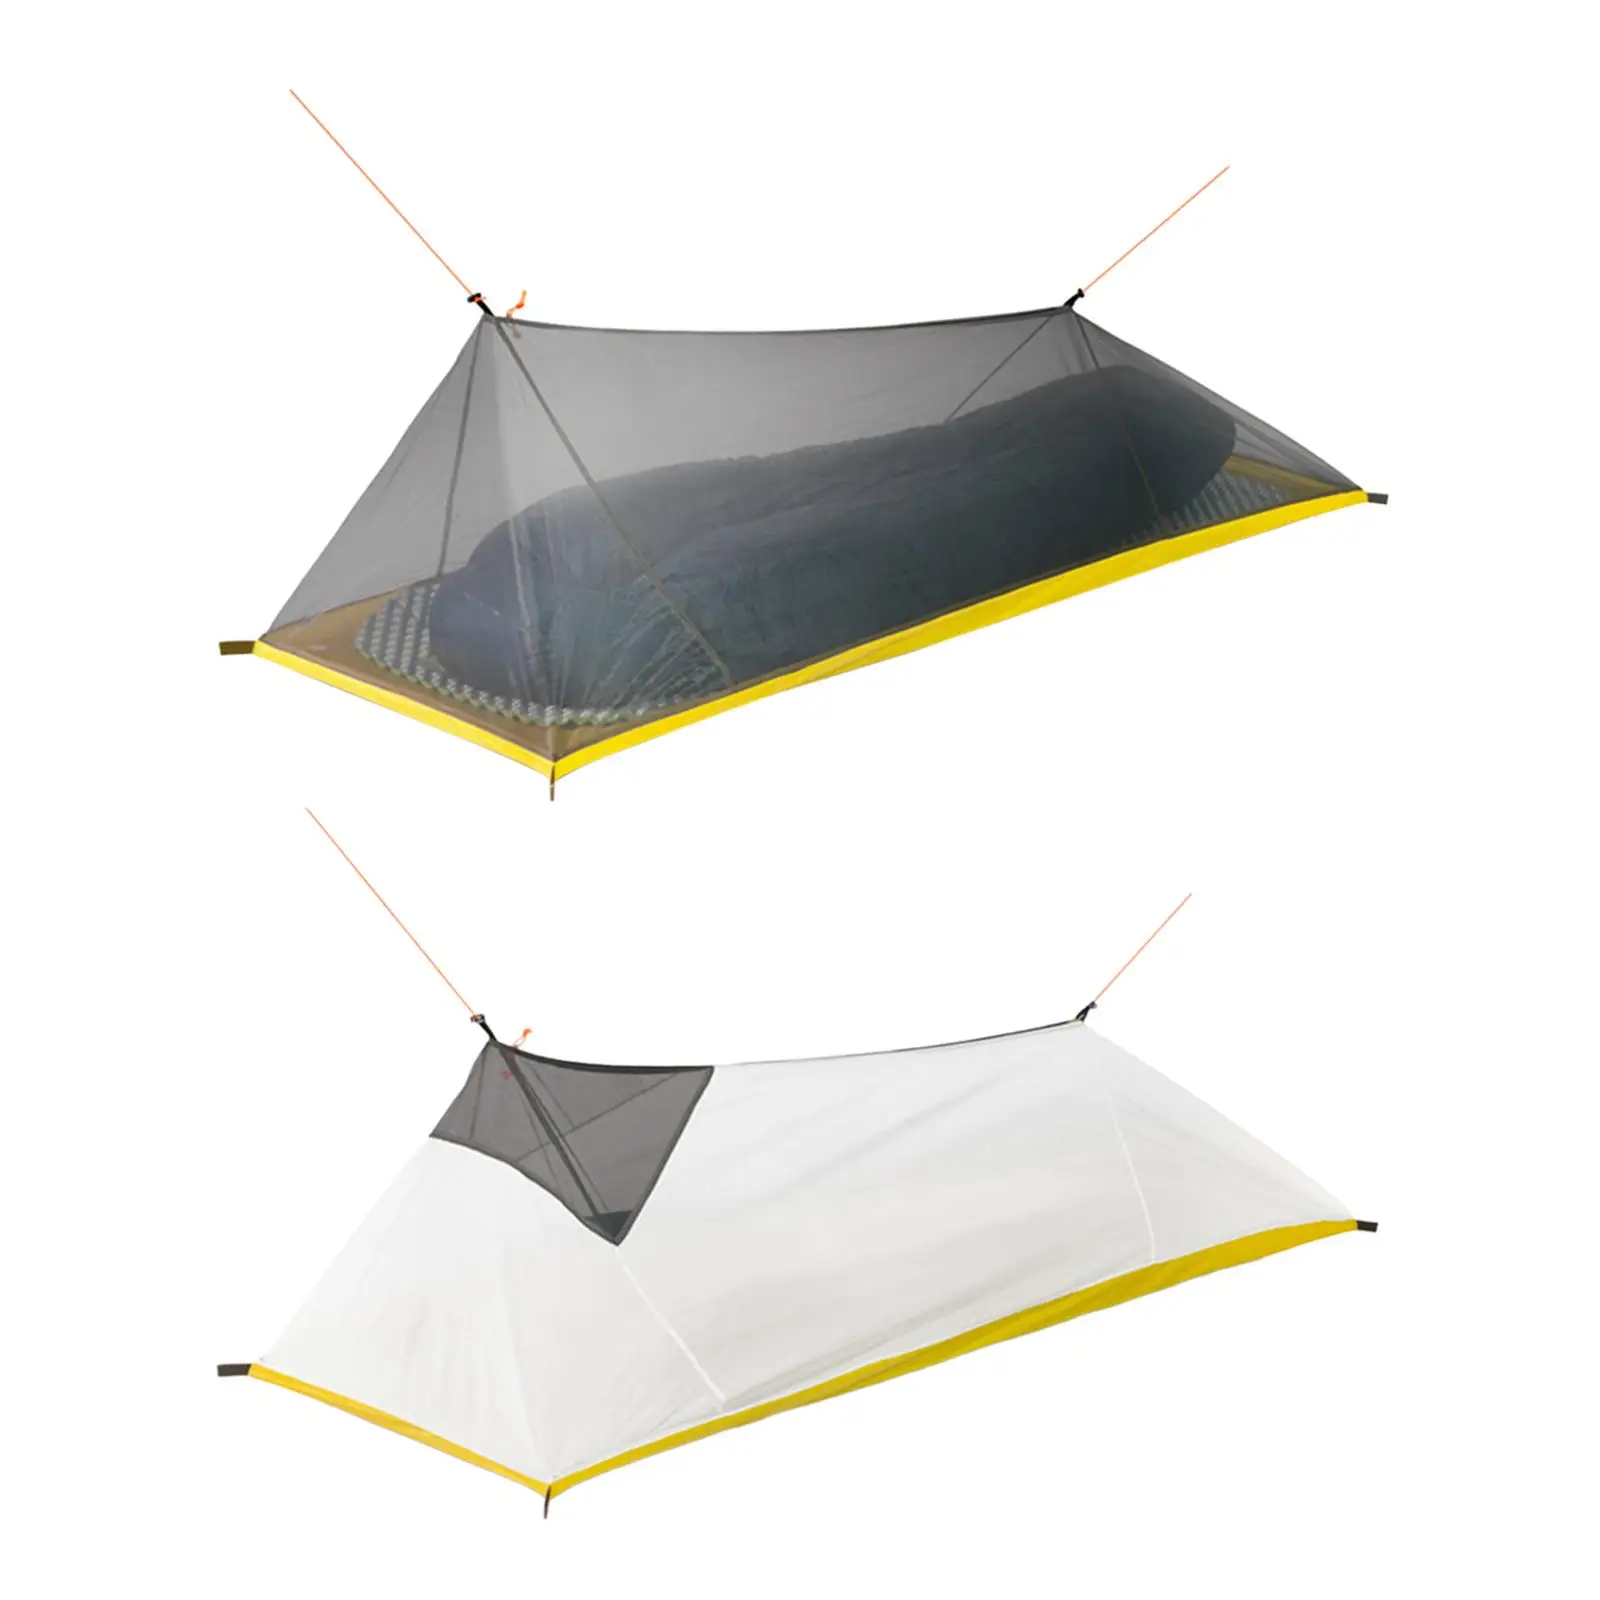 

Camping Tent Mesh Tent with Storage Bag Rainproof Sun Protection Ultralight Single Tent for Beach Yard Climbing Traveling Sports